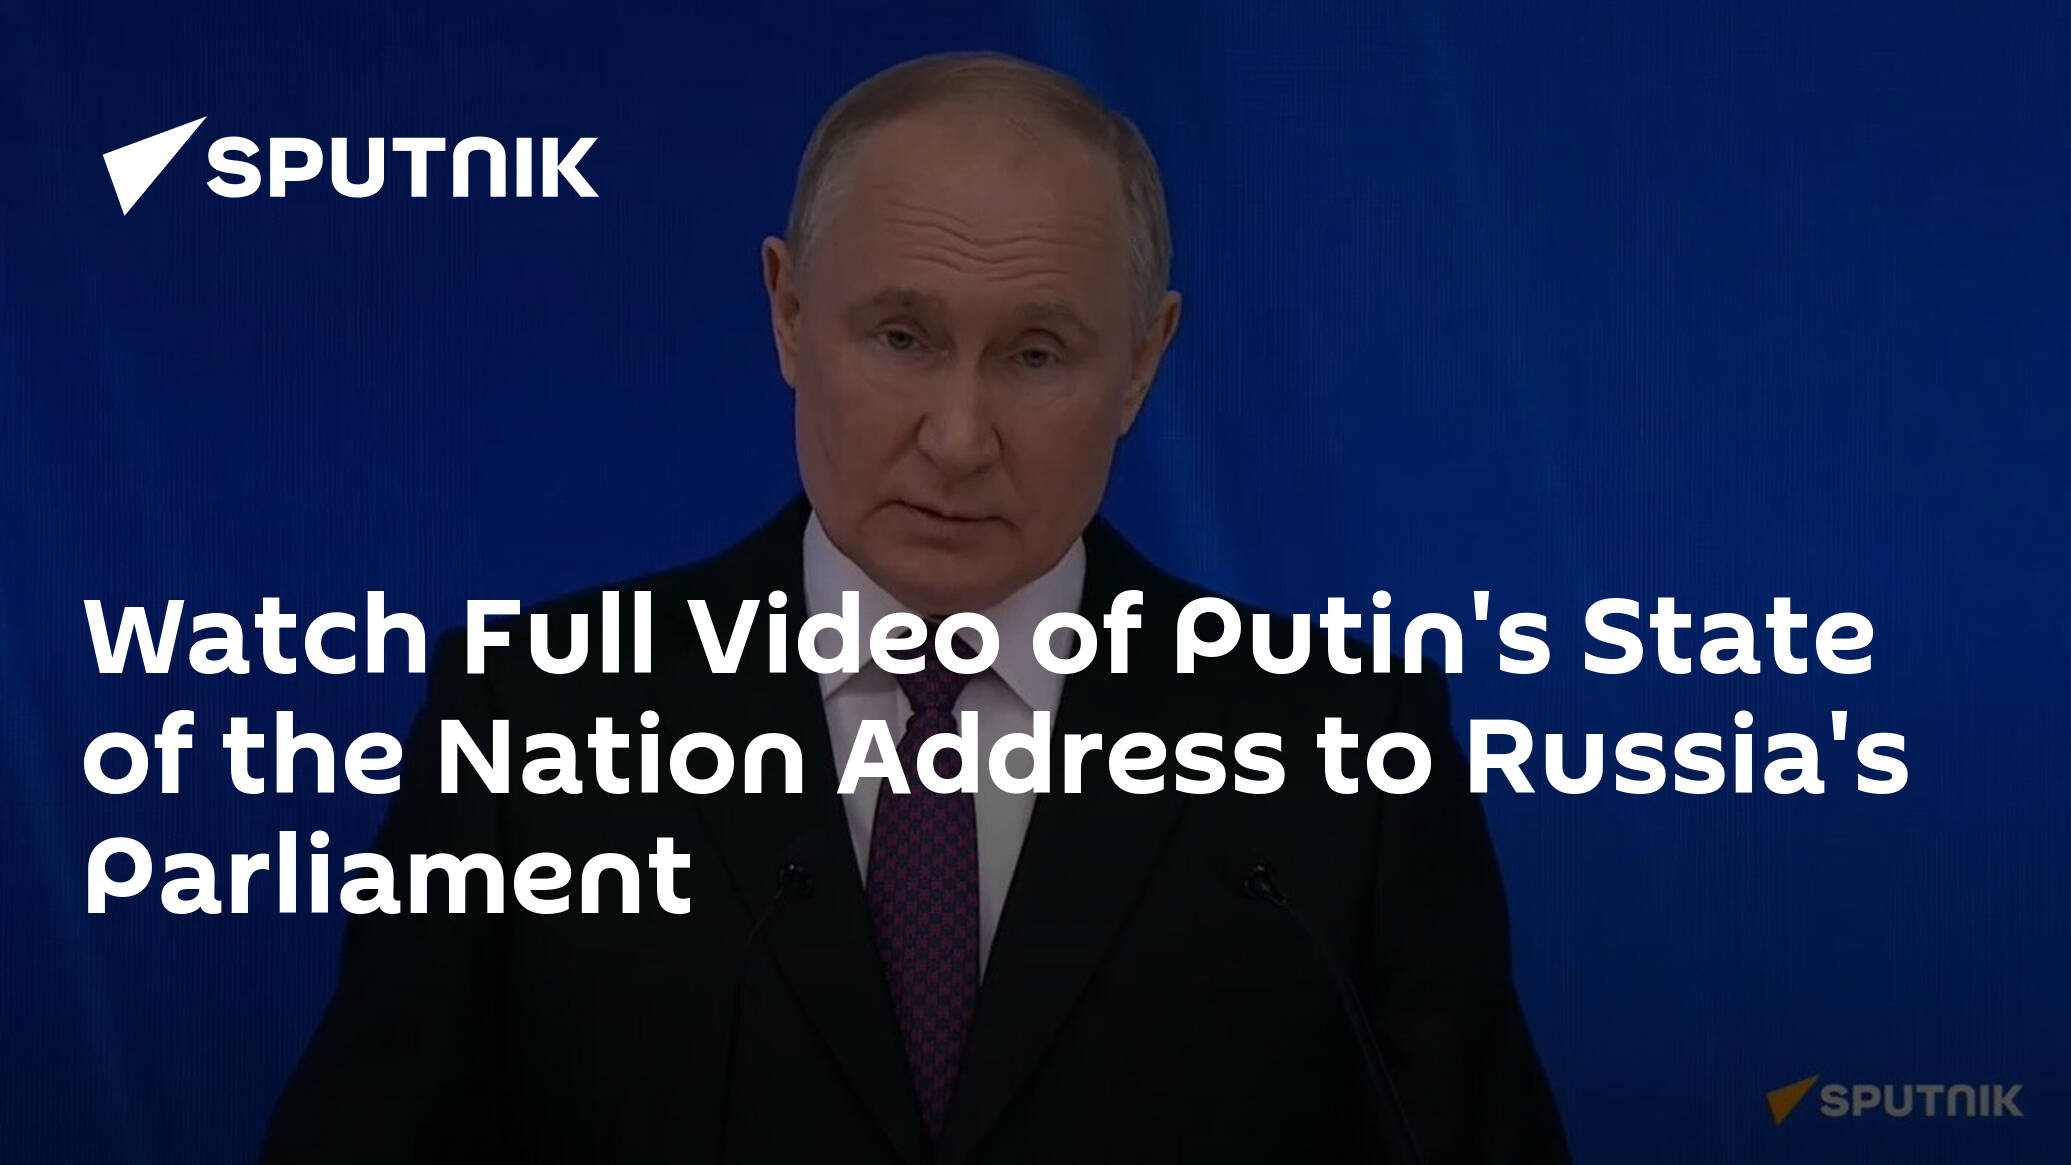 Watch Full Video of Putin's State of the Nation Tackle to Russia's Parliament